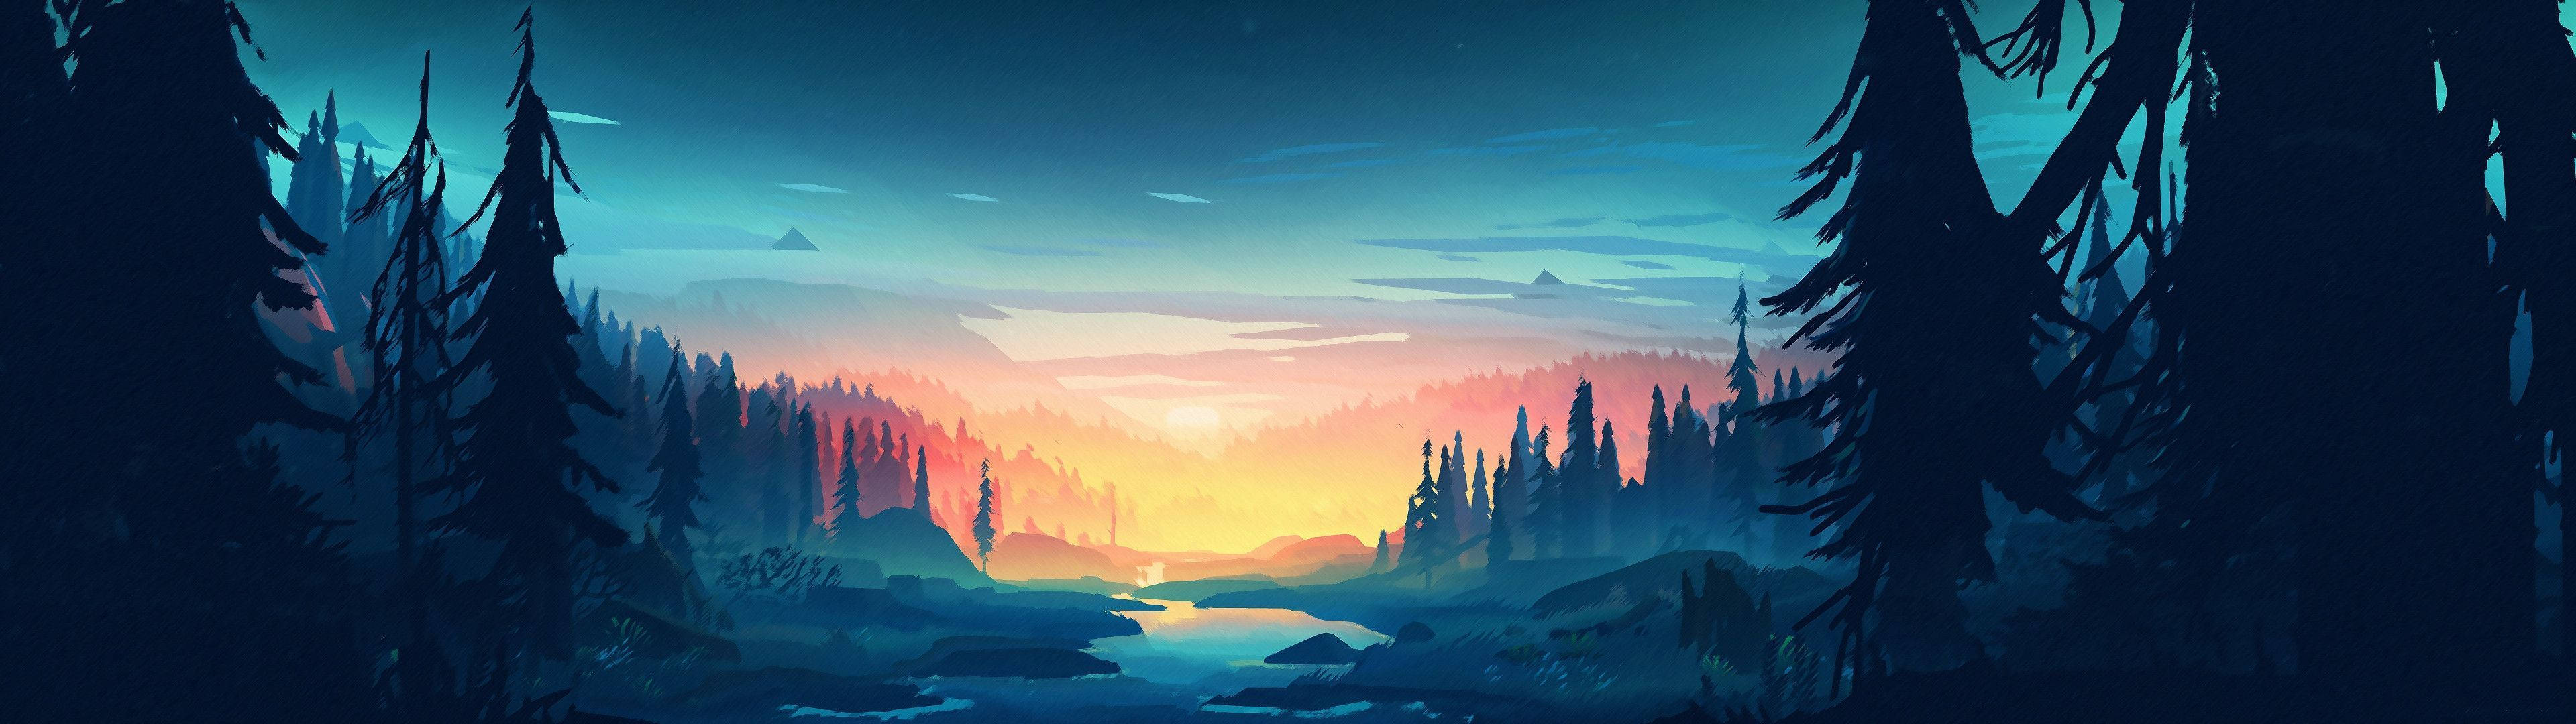 4k Dual Monitor Art Of Forest At Sunset Background